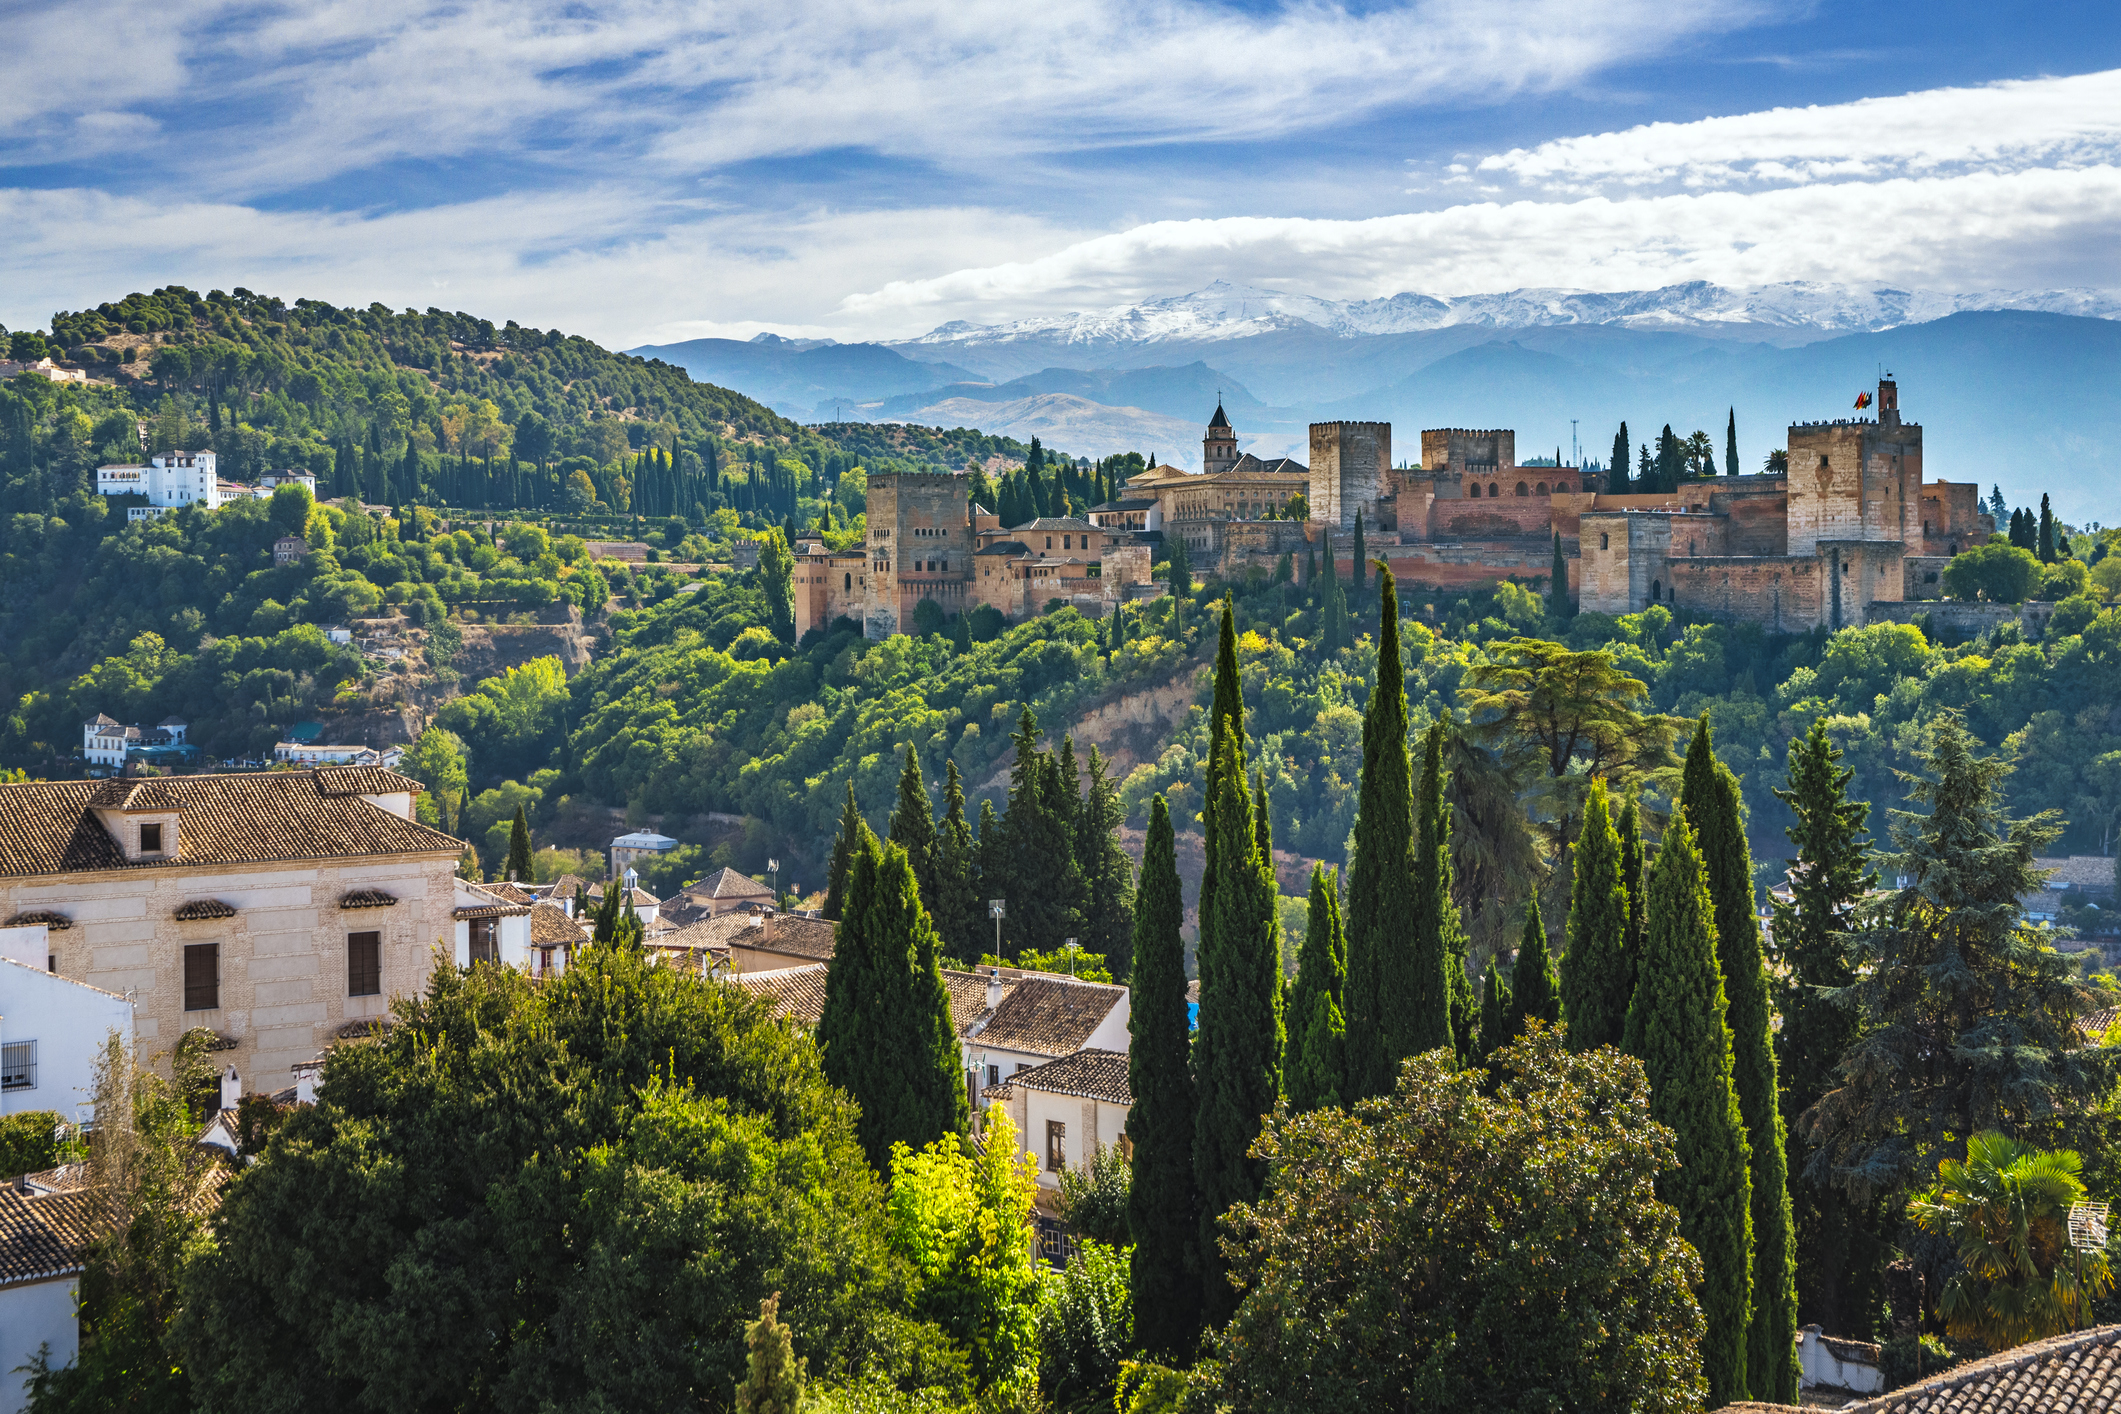 View of The Alhambra in Granada, Spain